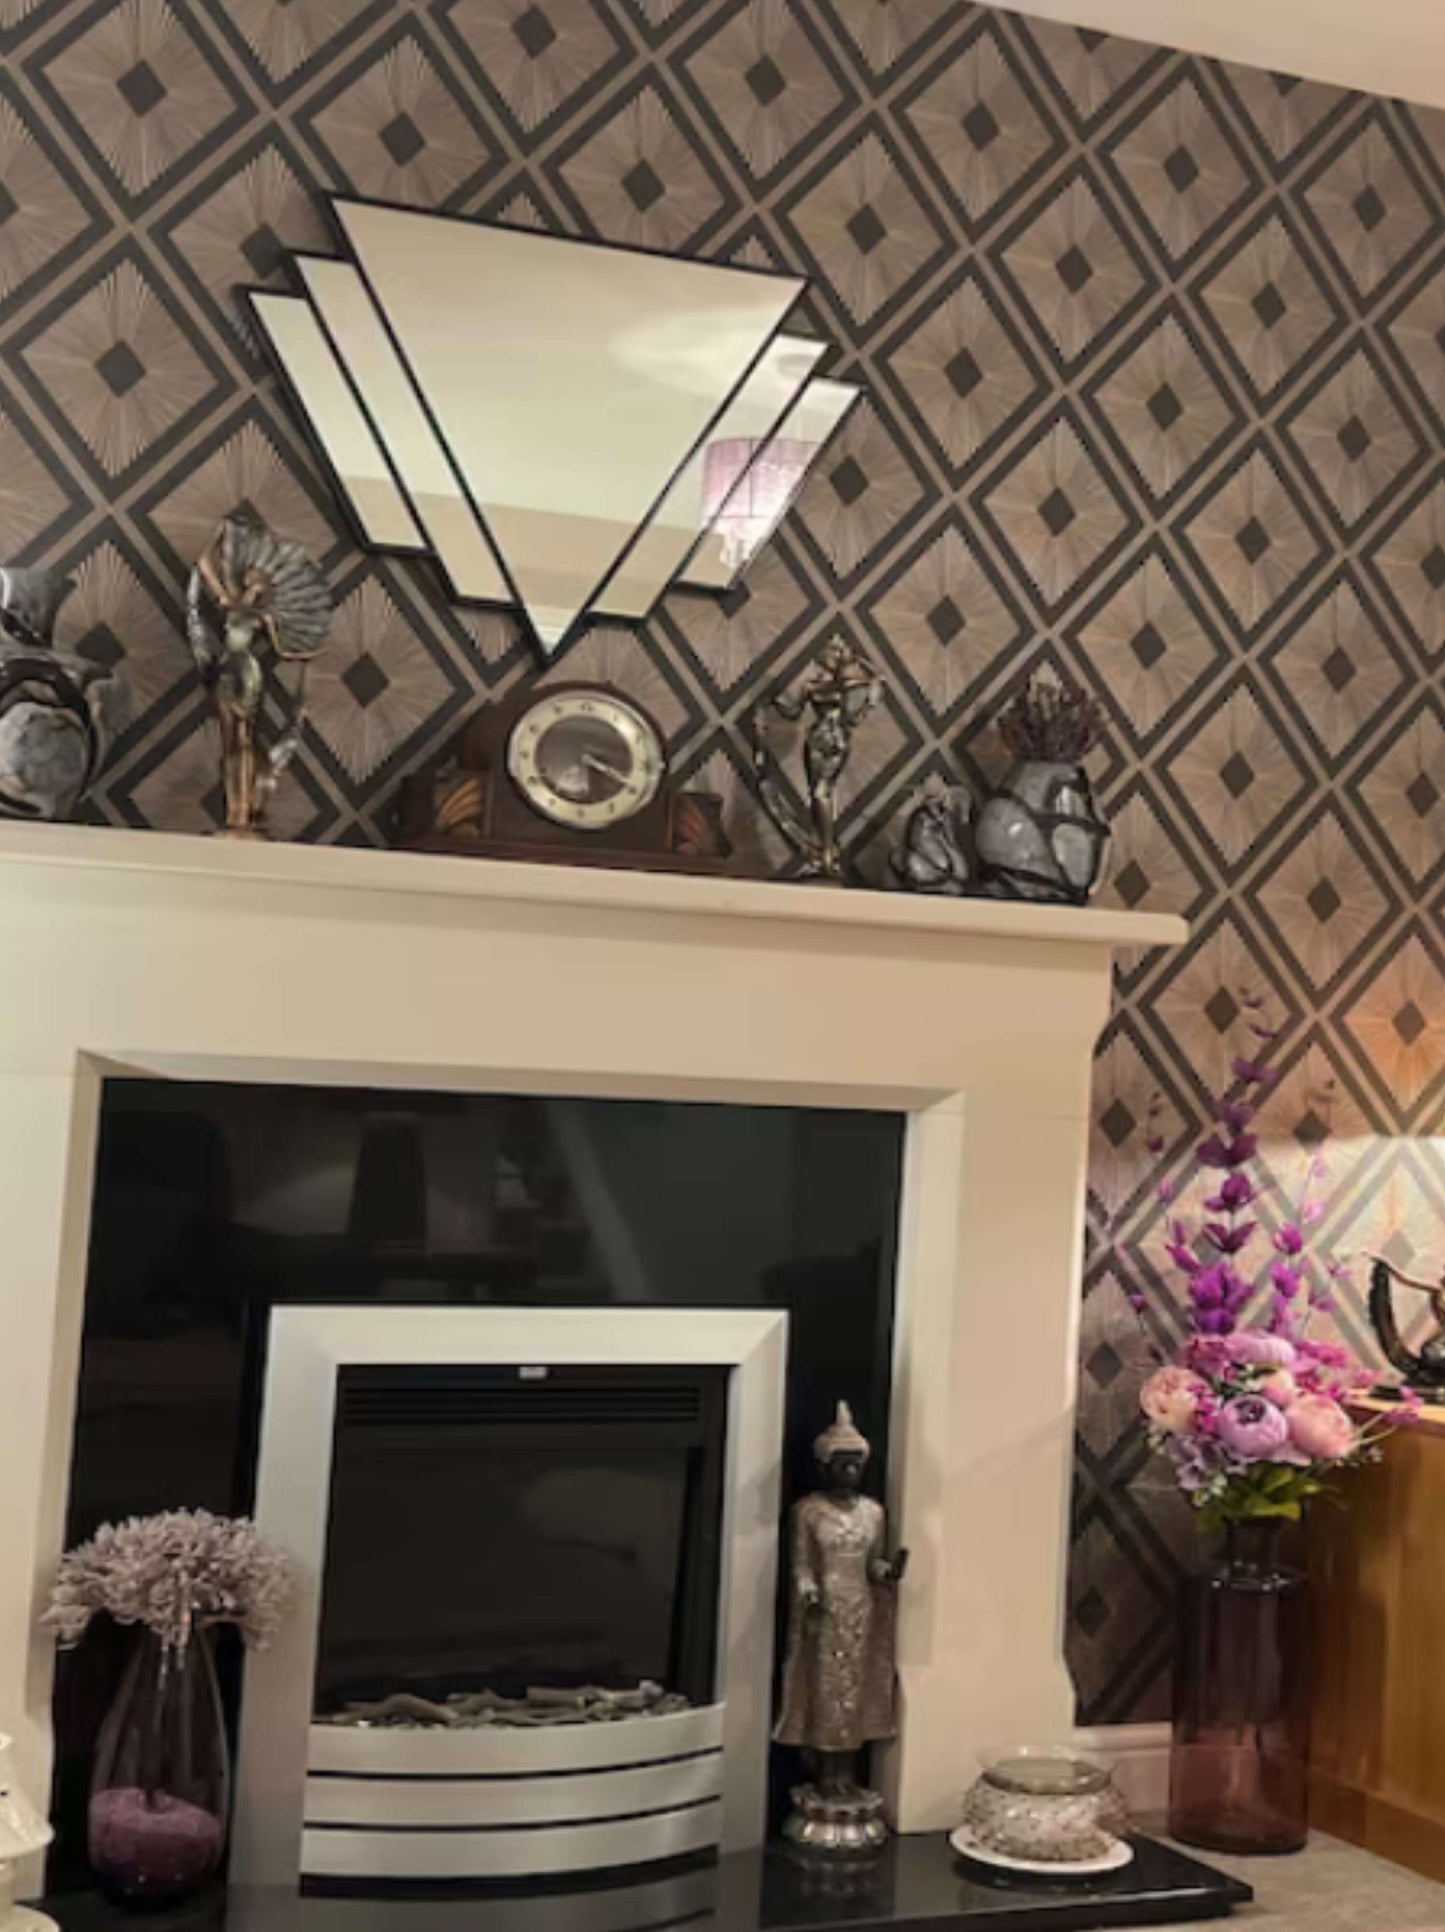 Luxury Rectangle Art Deco Fan Mirror in black lead over mantel with decorative wallpapered wall